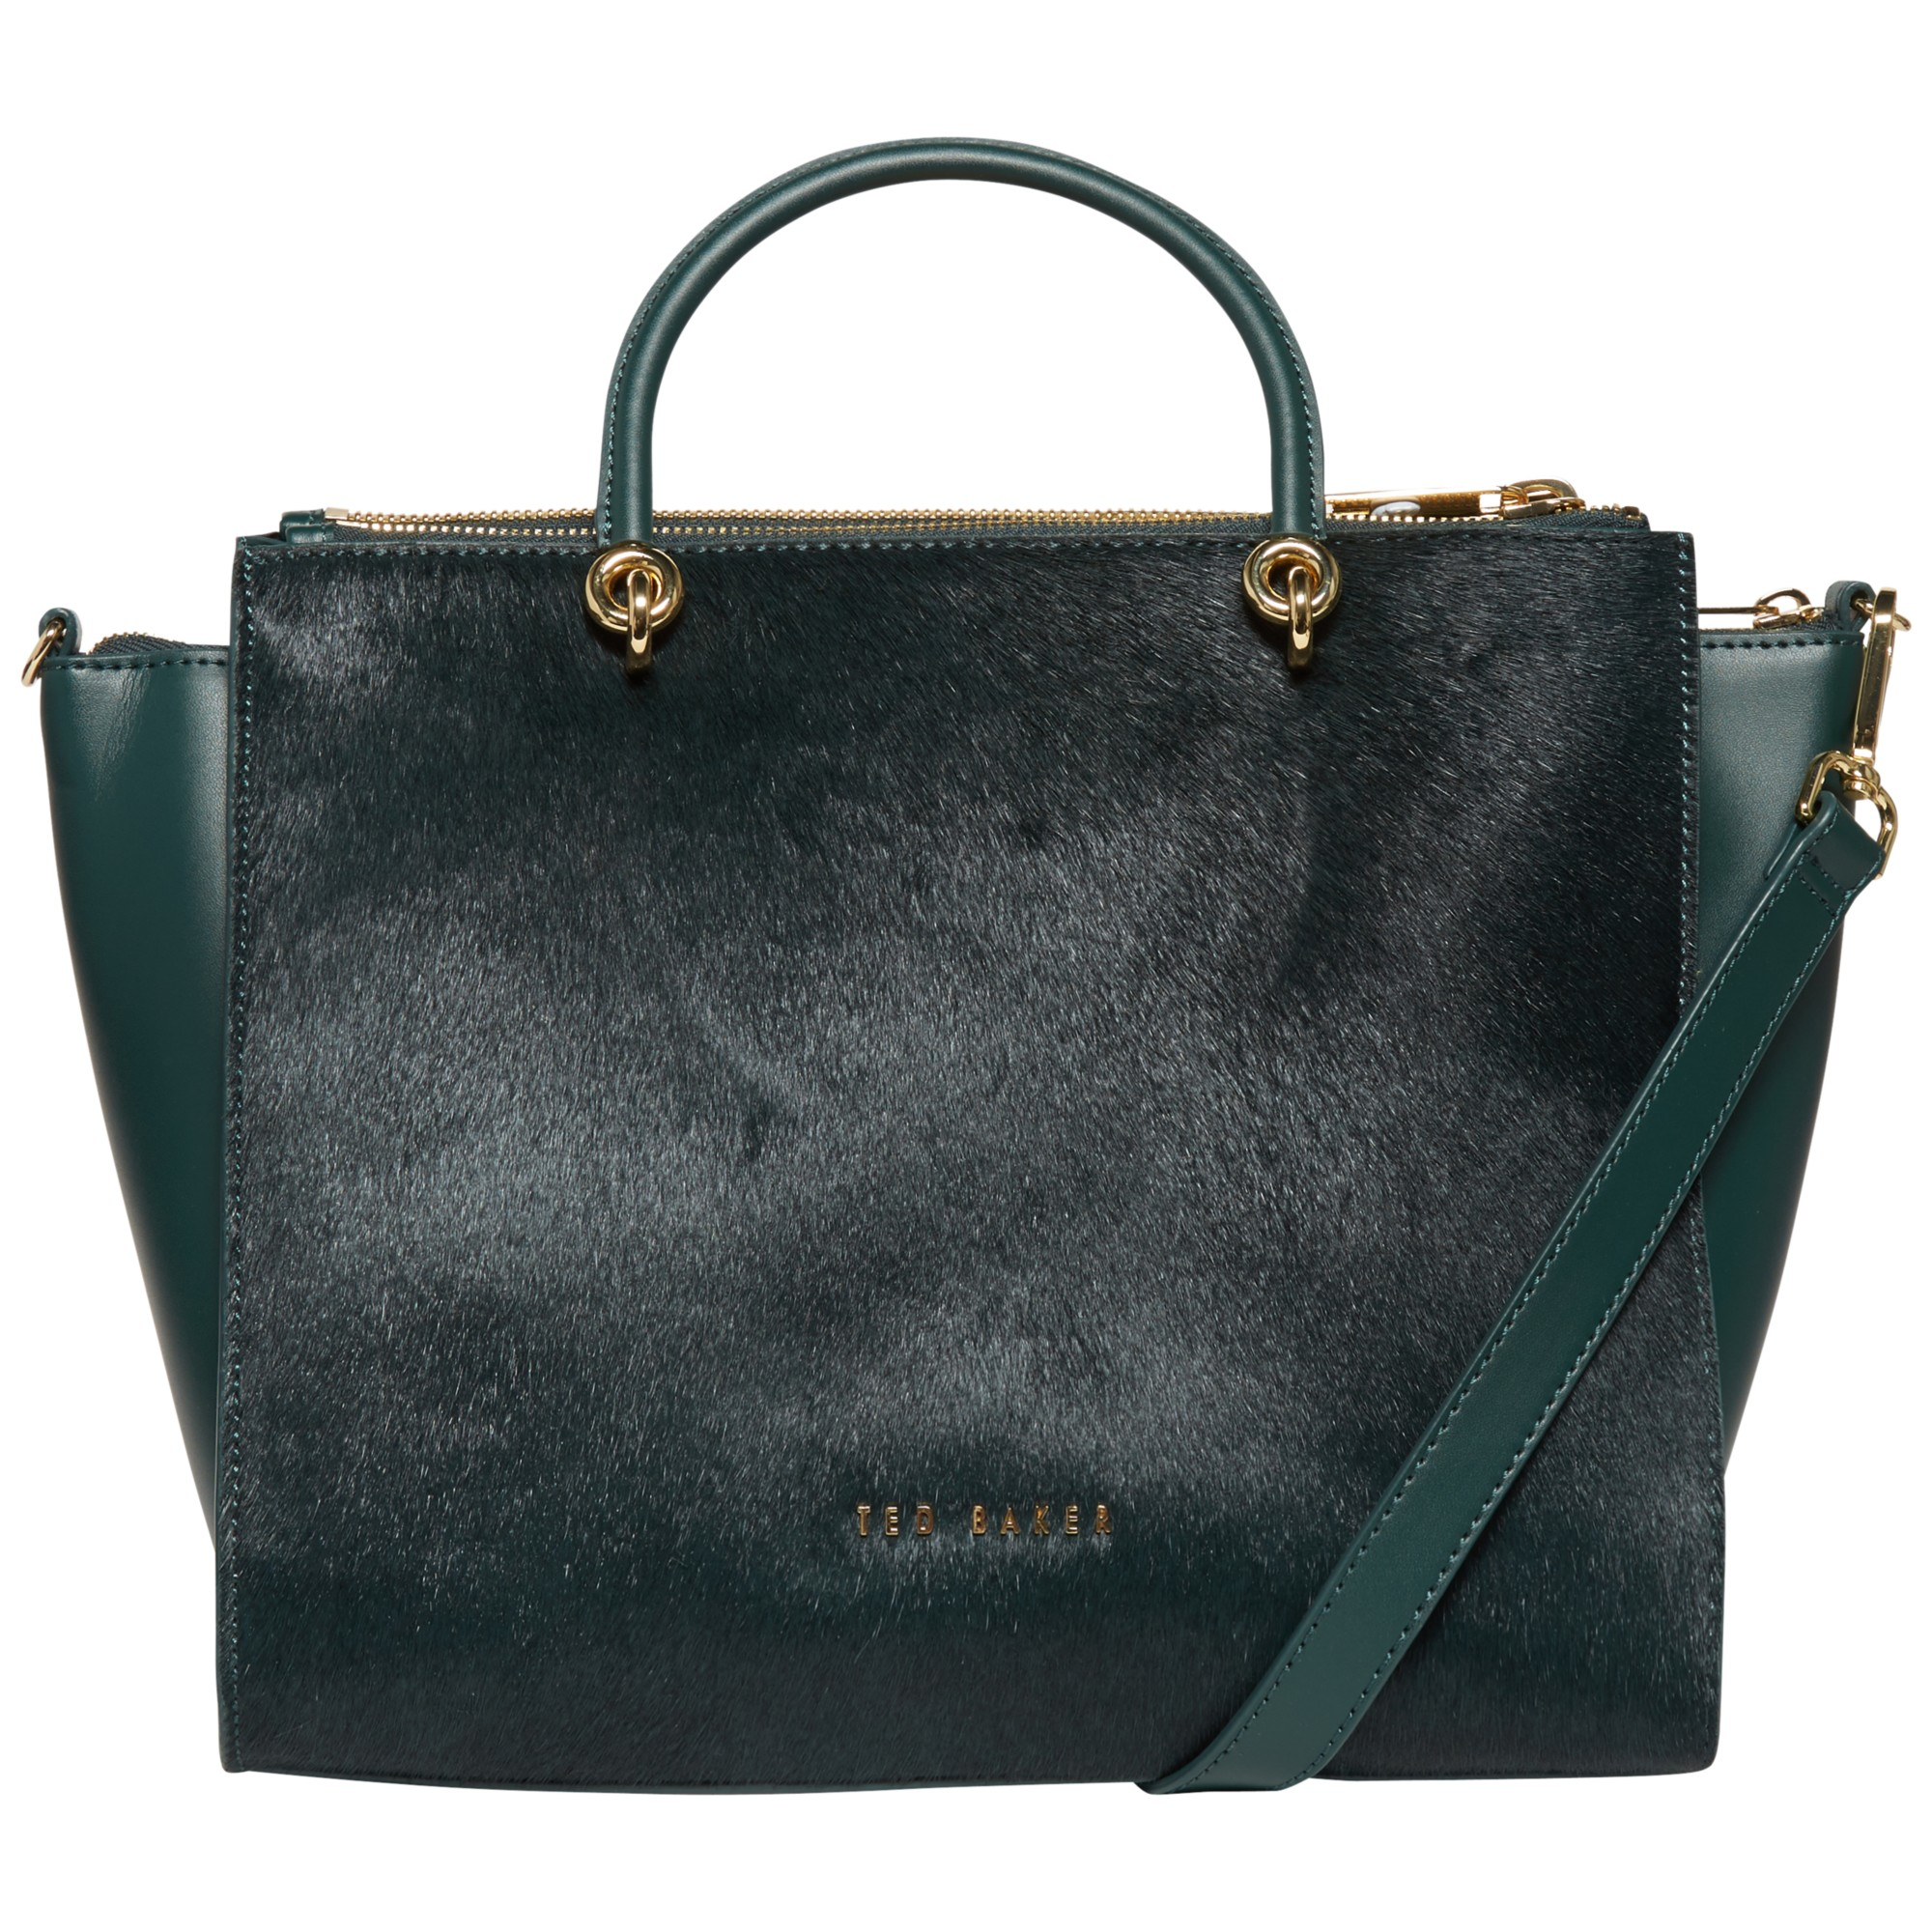 Ted baker Louisa Large Leather Cross Body Tote Bag in Green (Dark Green) | Lyst